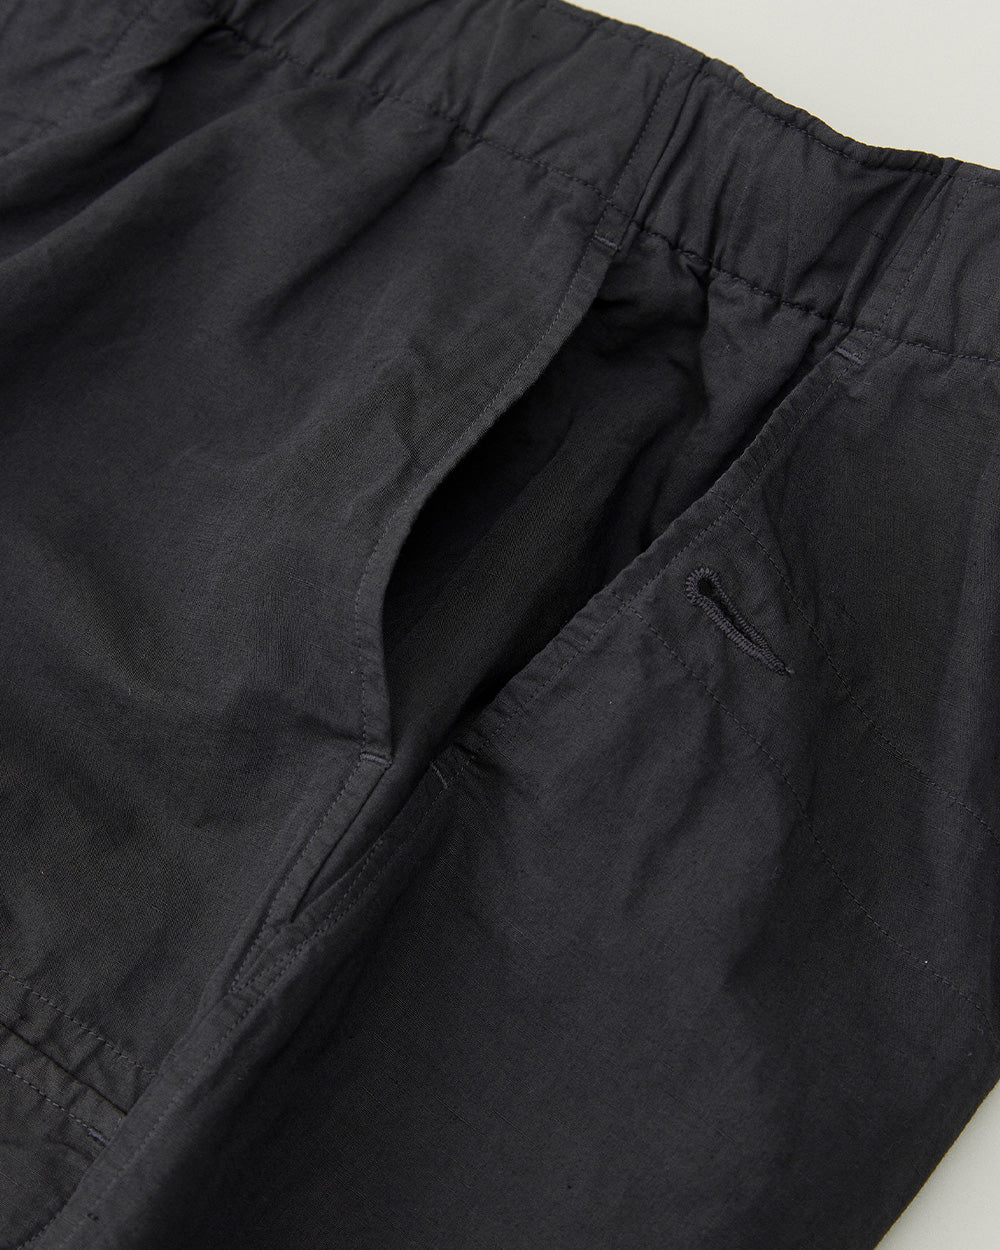 Weather Cloth Wide Easy Trousers